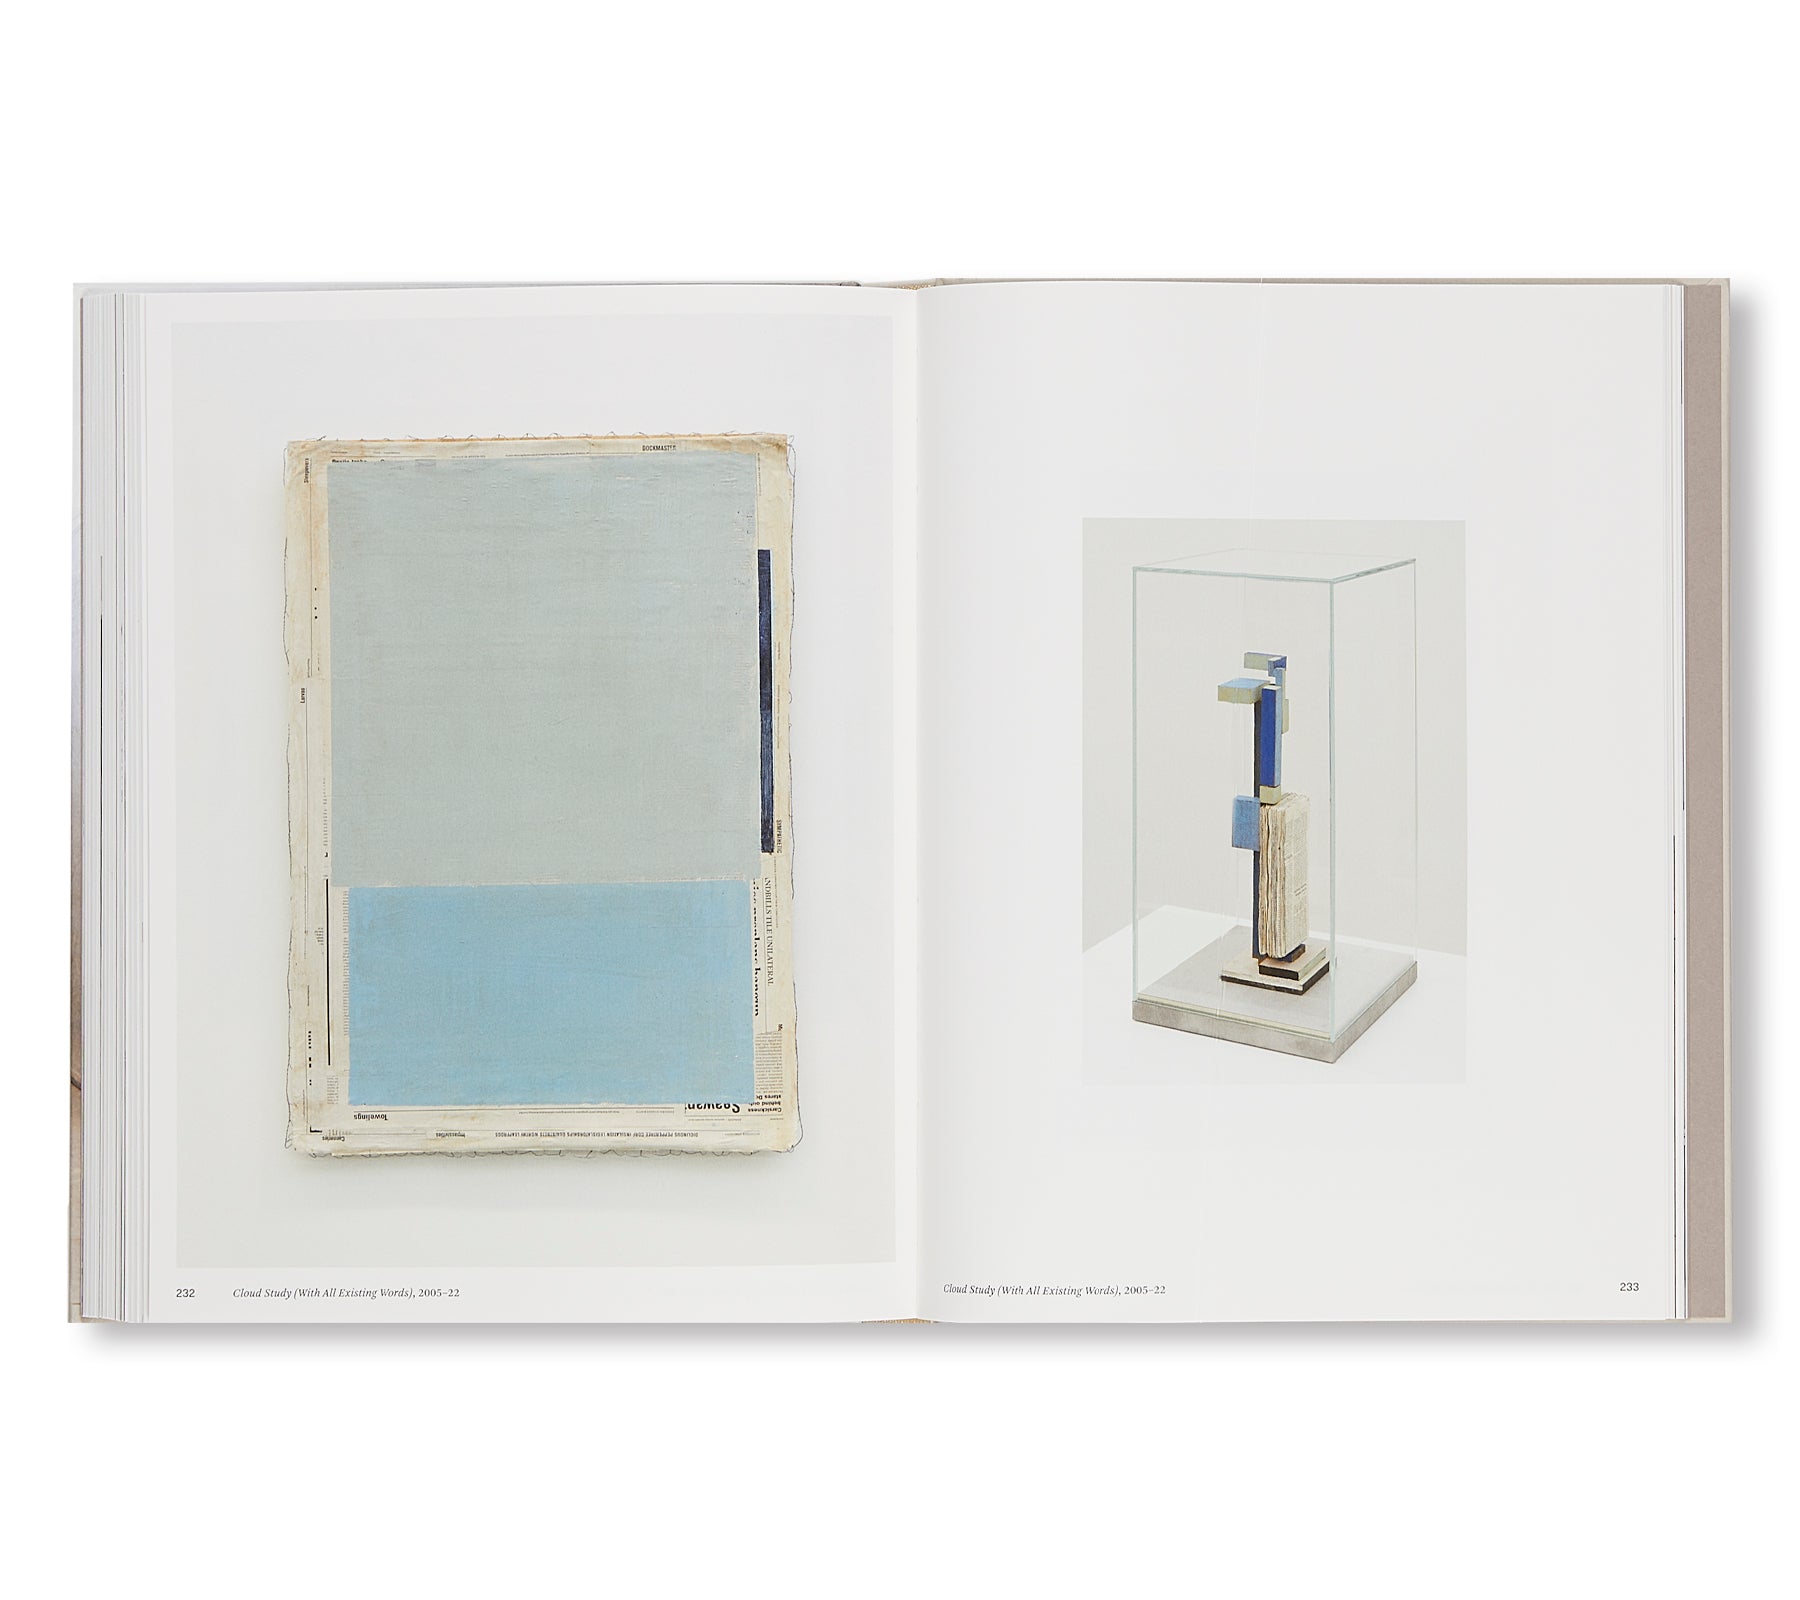 MARK MANDERS – ZENO X GALLERY, 28 YEARS OF COLLABORATION by Mark Manders